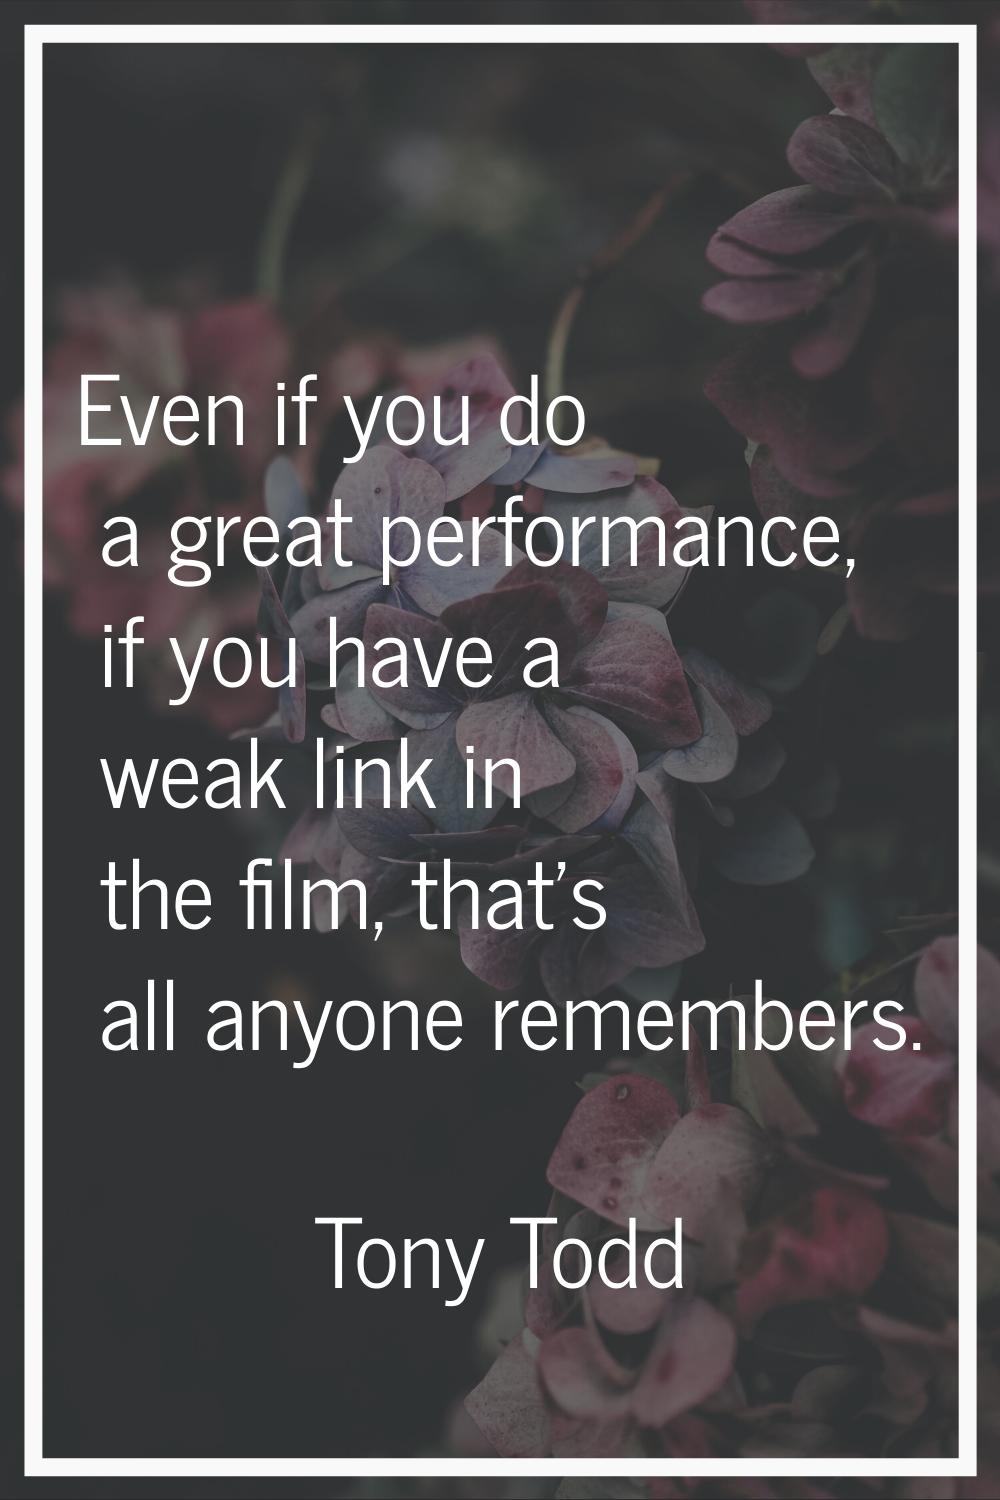 Even if you do a great performance, if you have a weak link in the film, that's all anyone remember